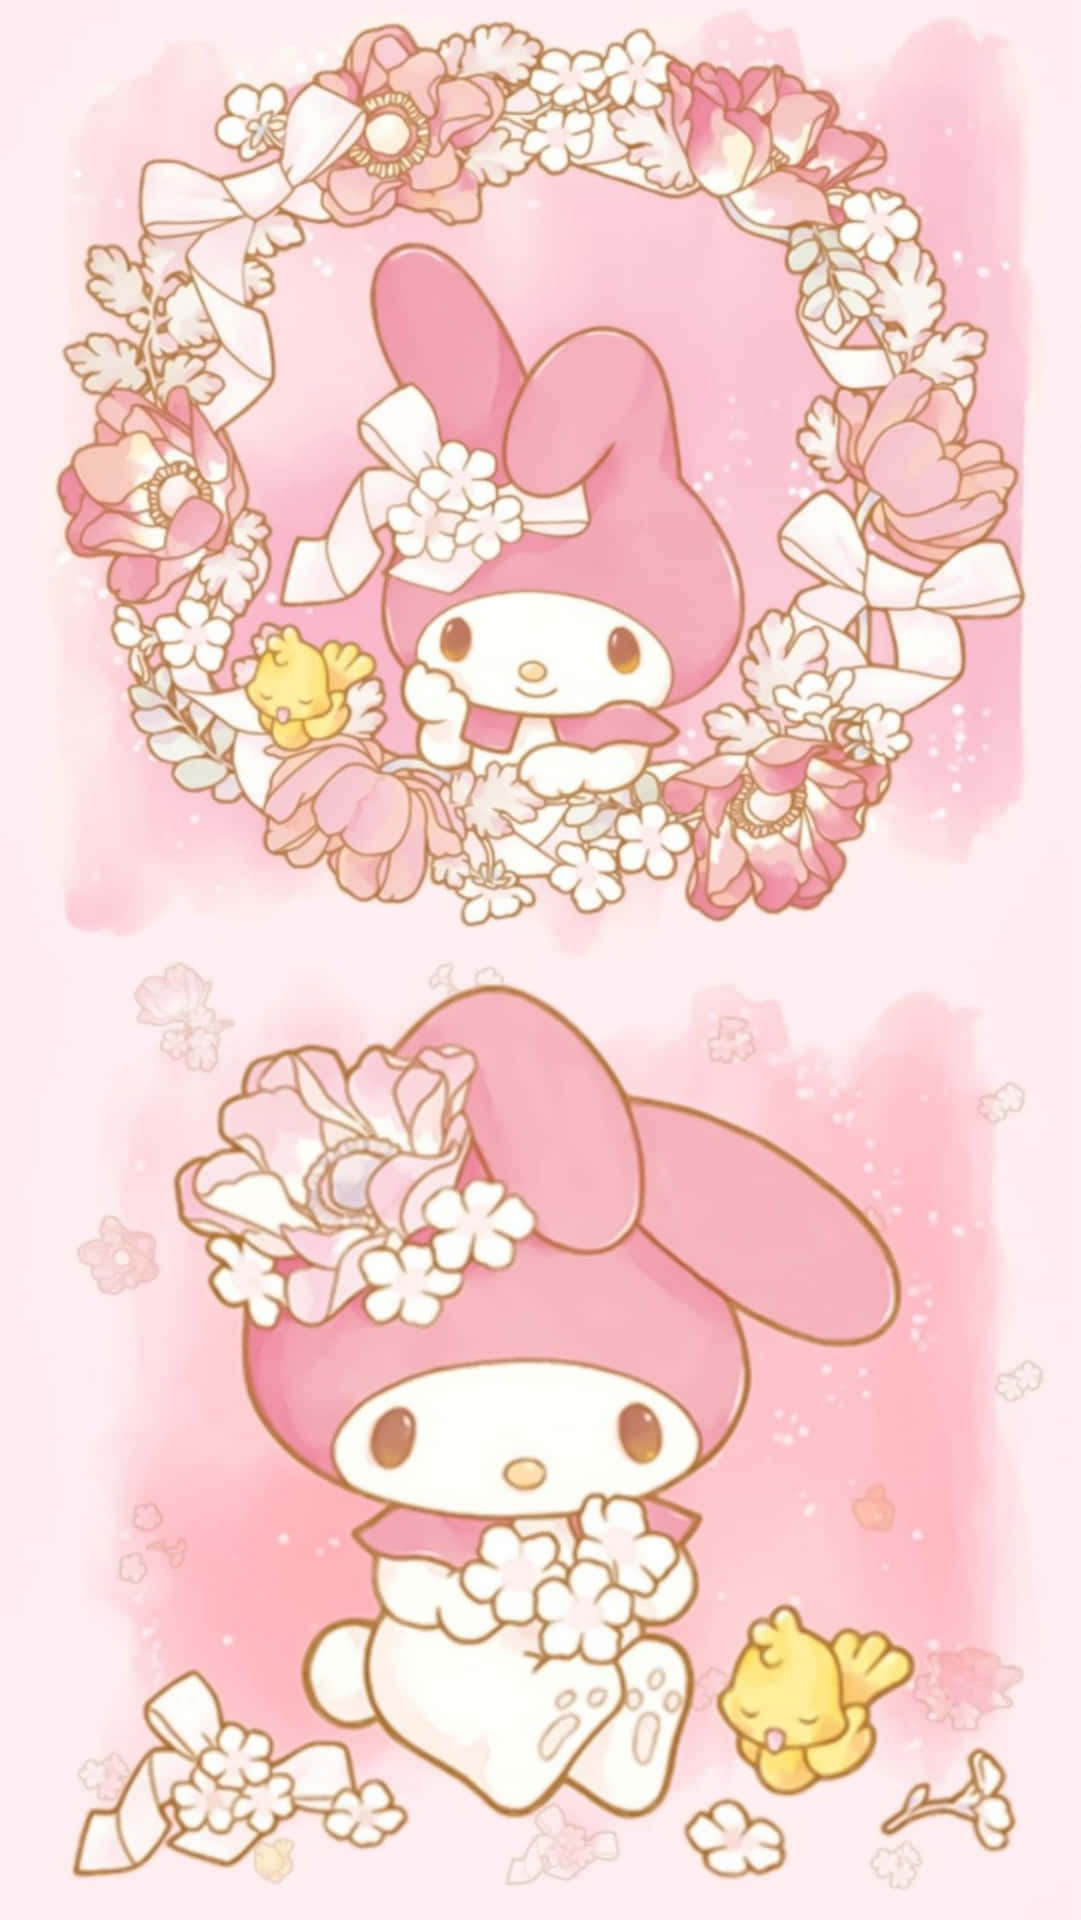 Cute My Melody With Floral Design Wallpaper